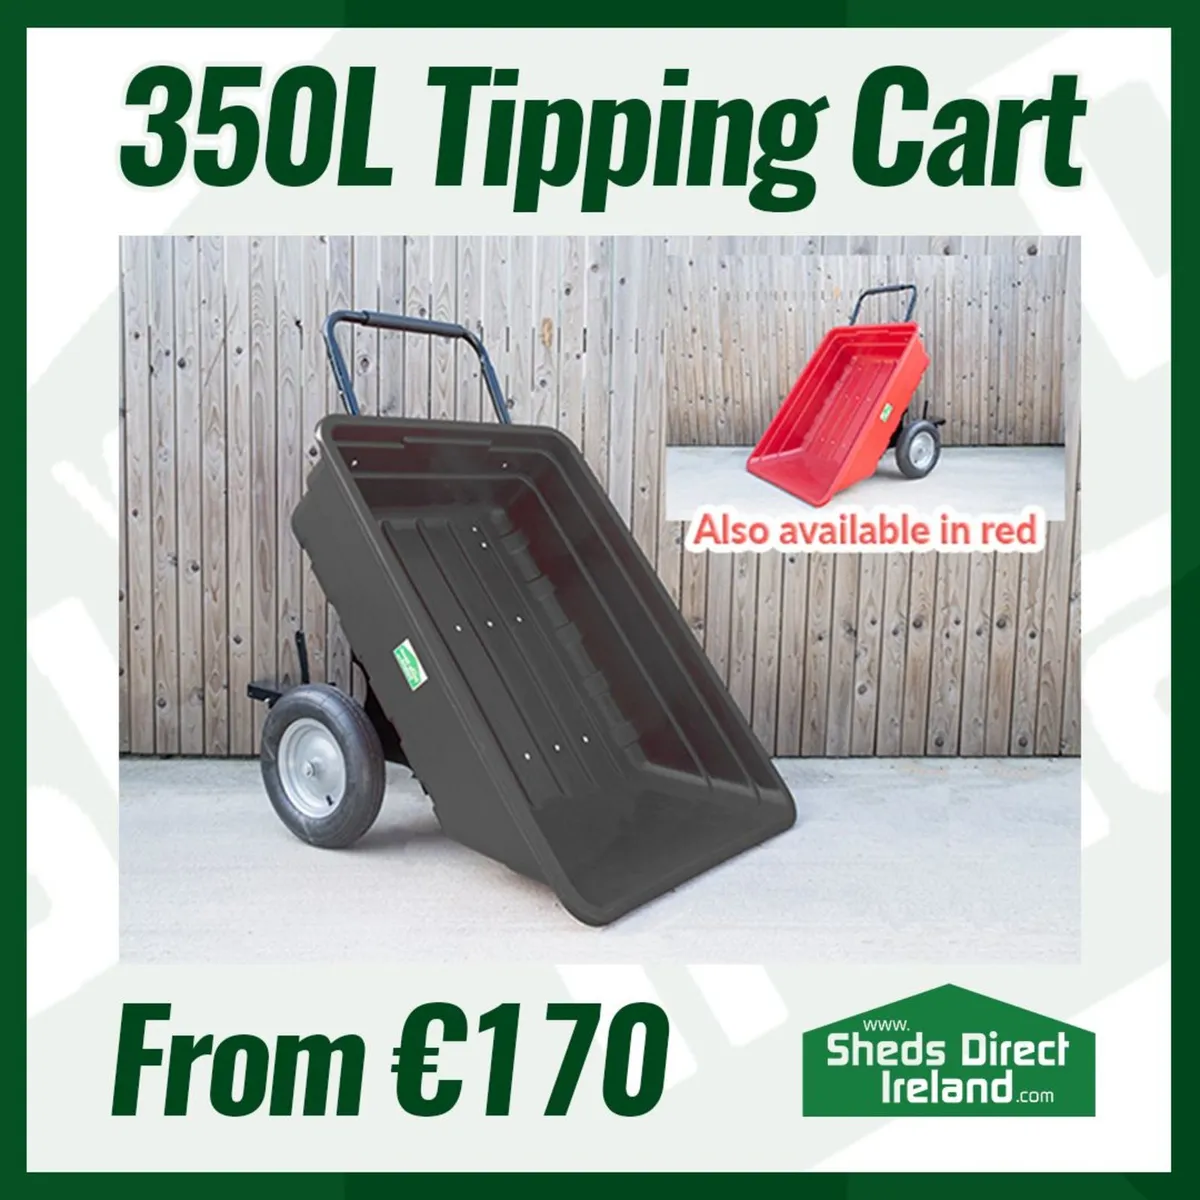 350L Tipping Cart (Red or Black) - Image 1